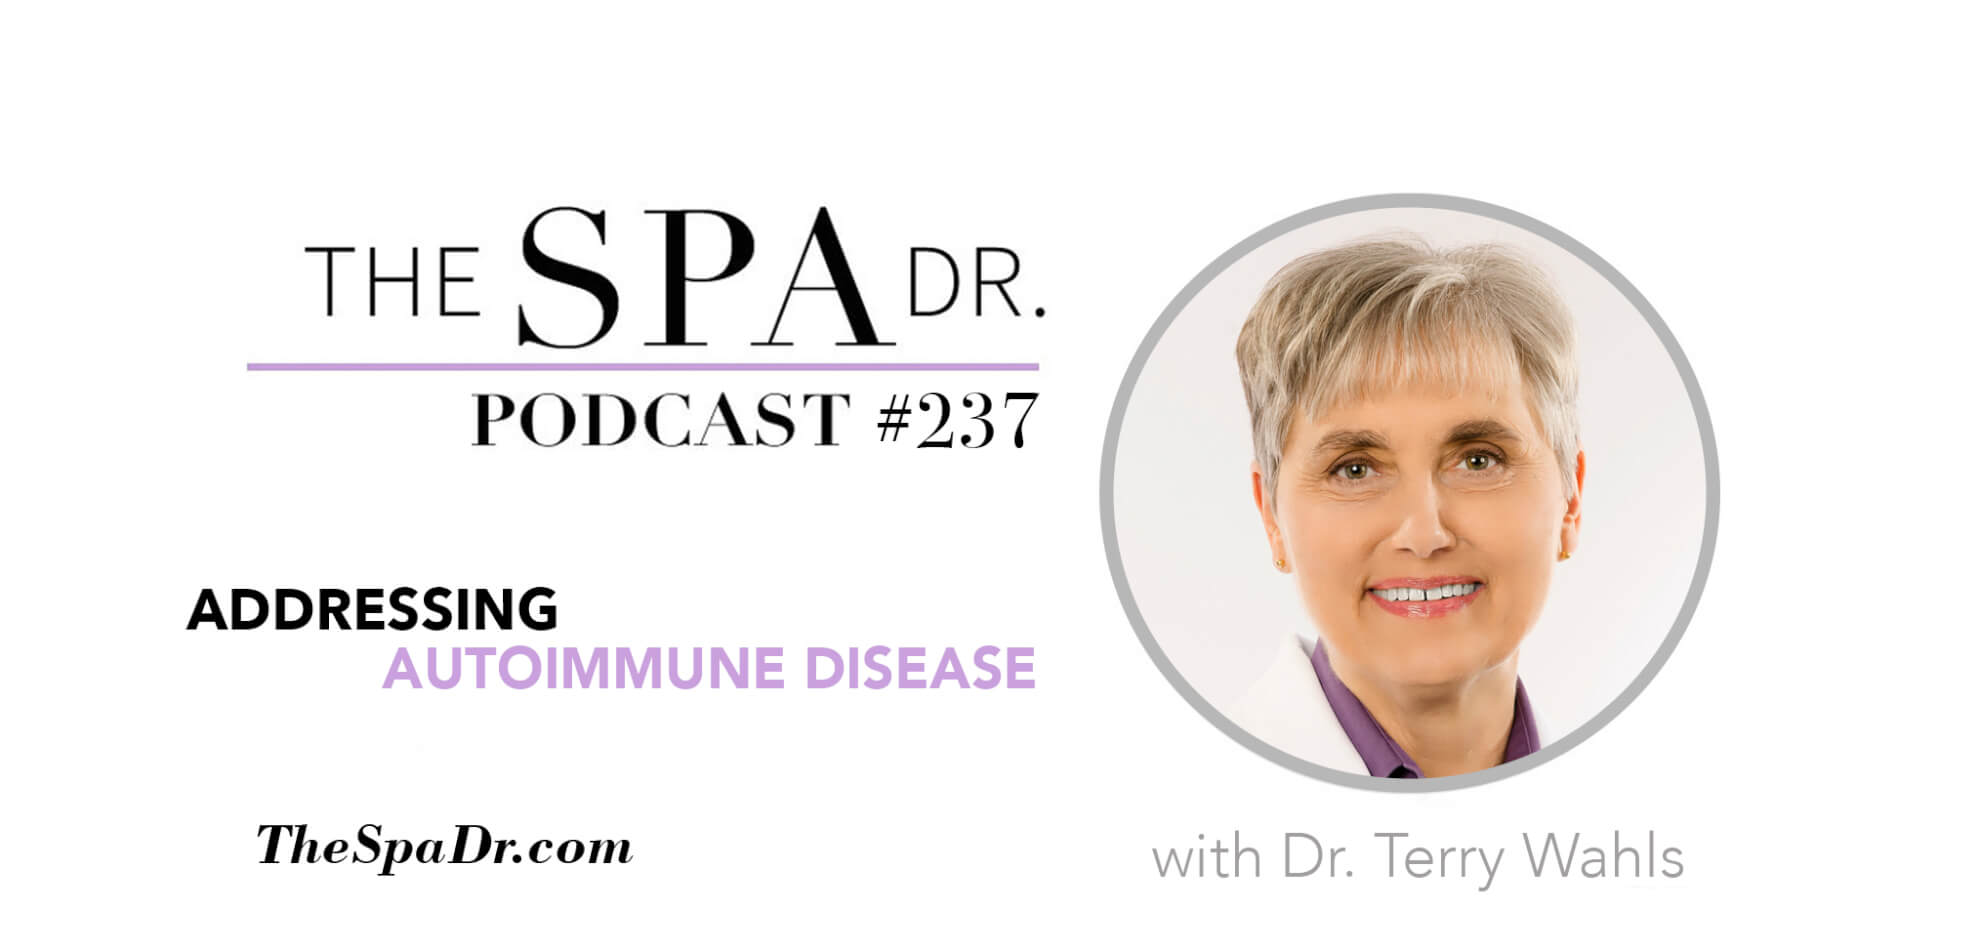 Addressing Autoimmune Disease with Dr. Terry Wahls